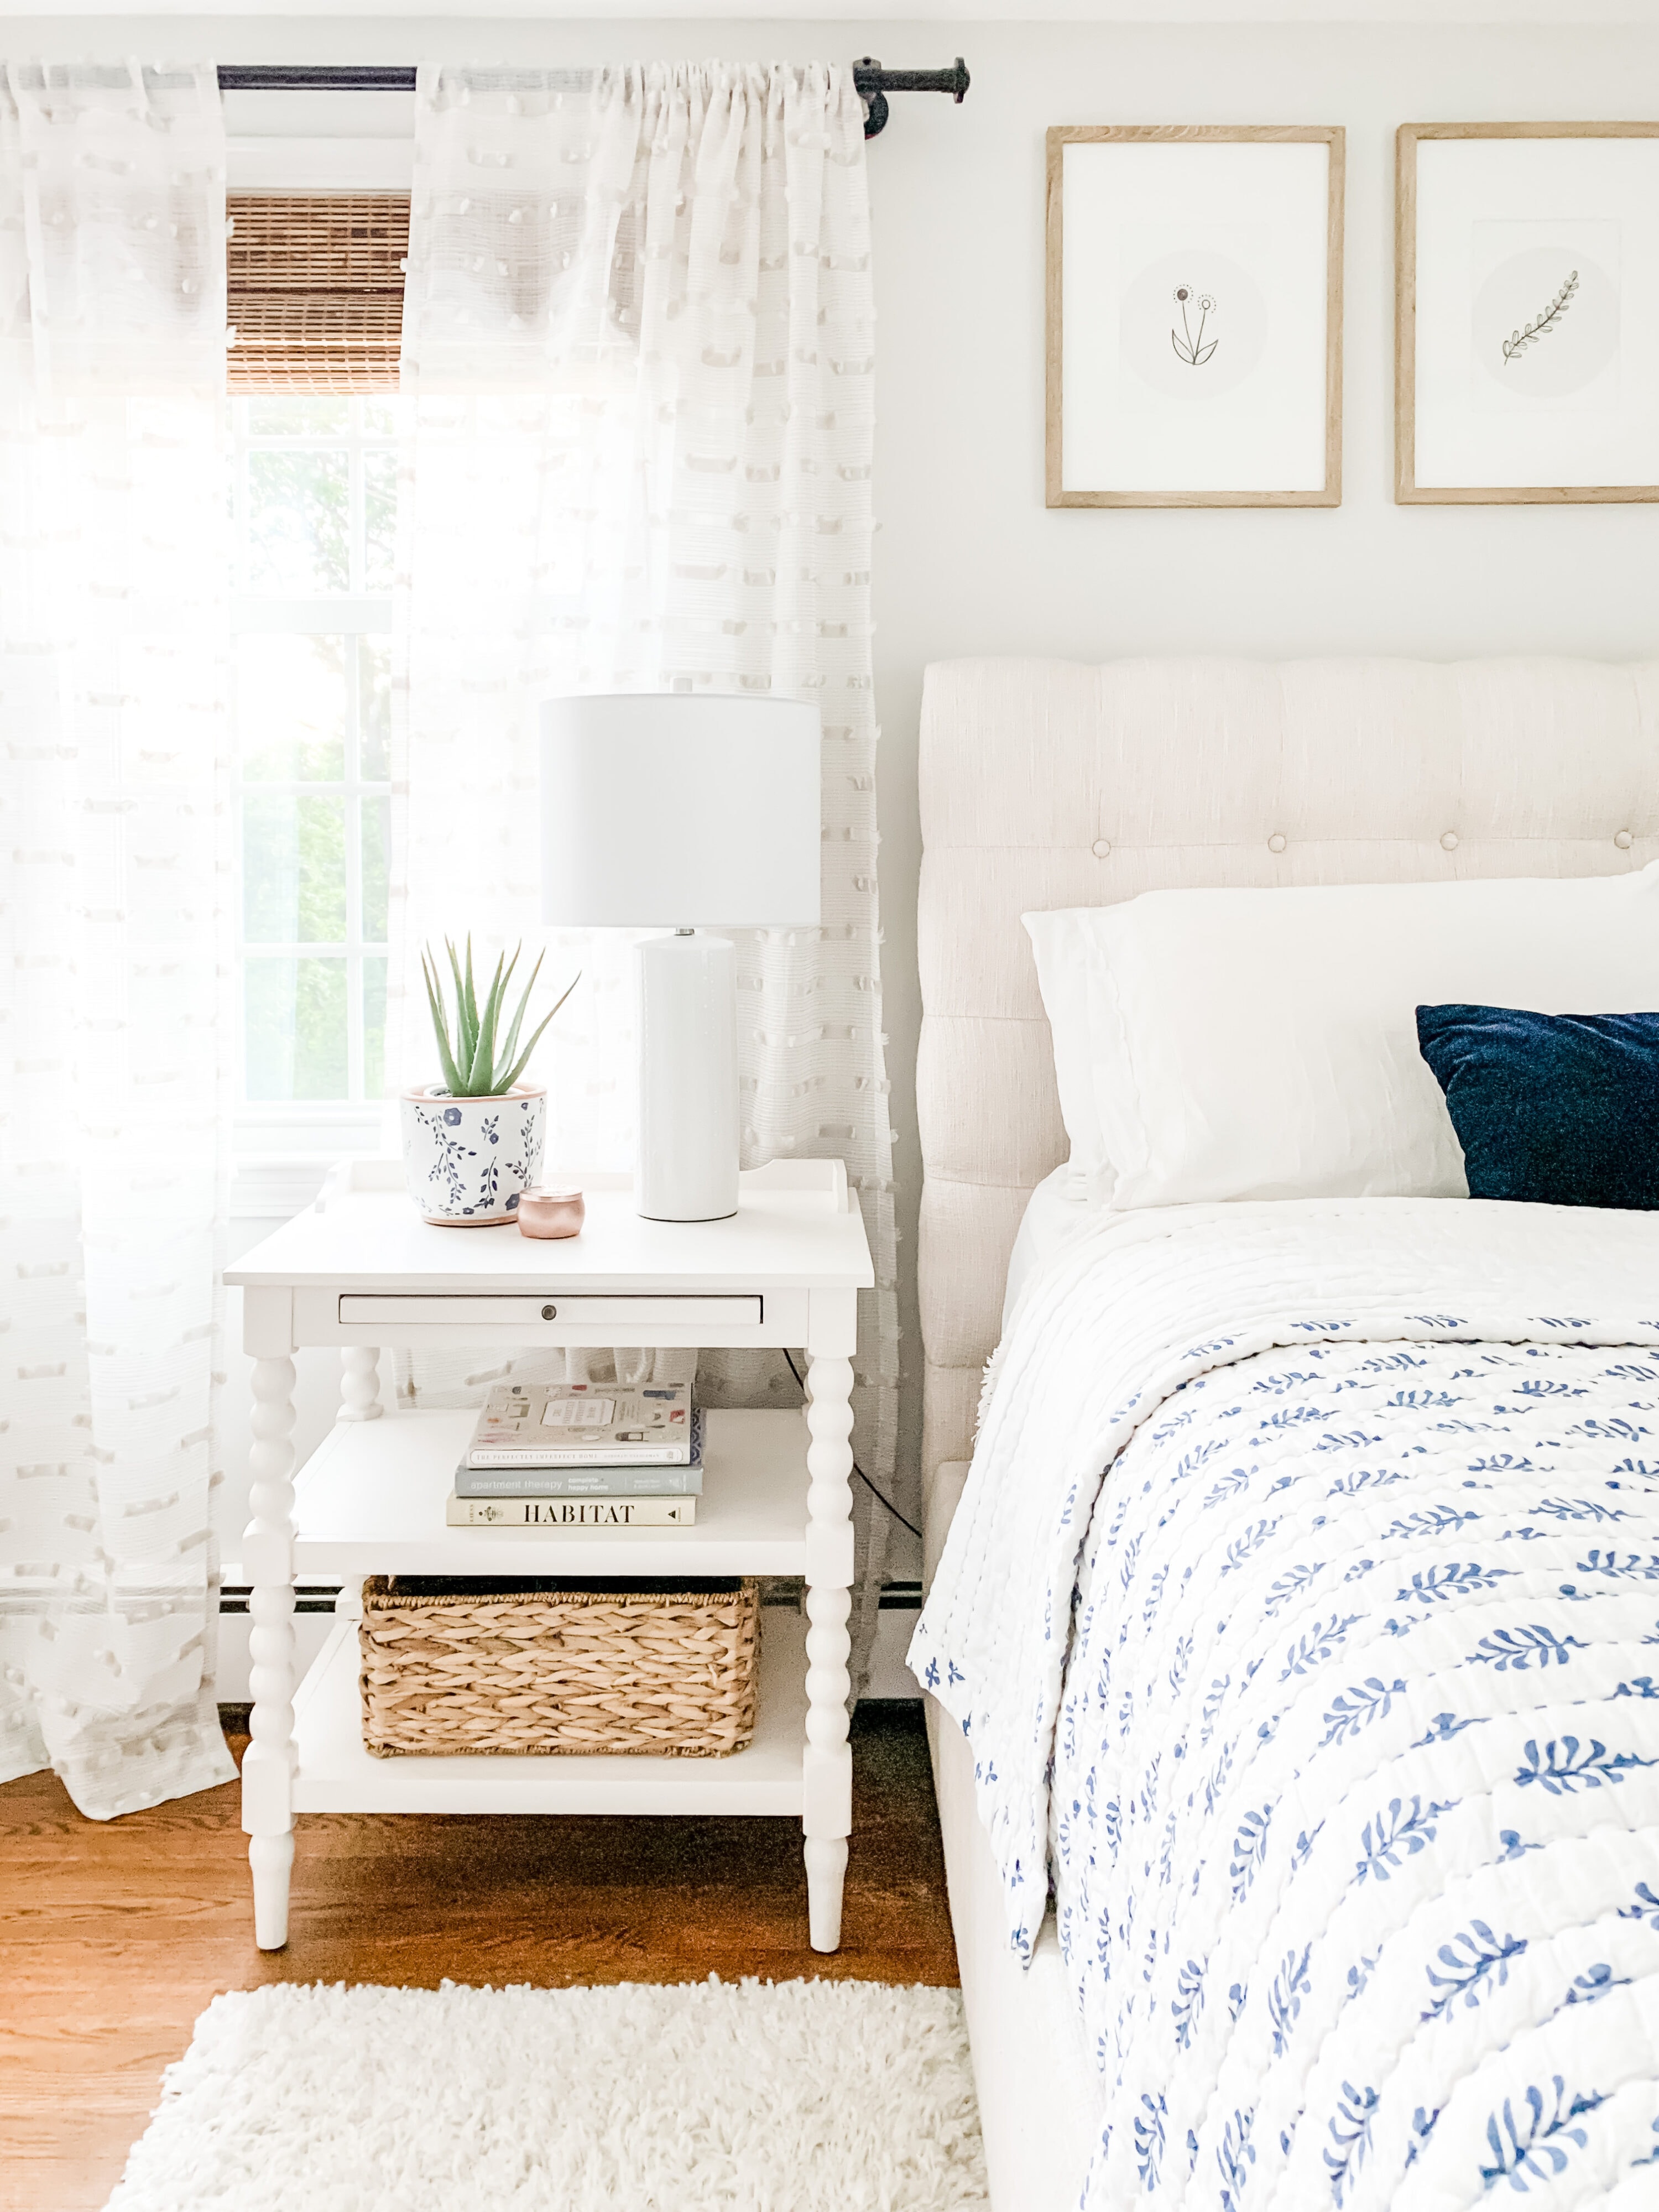 A bedroom with an off-white upholstered headboard, blue and white blanket, a white nightstand with various decor items and a window with white curtains